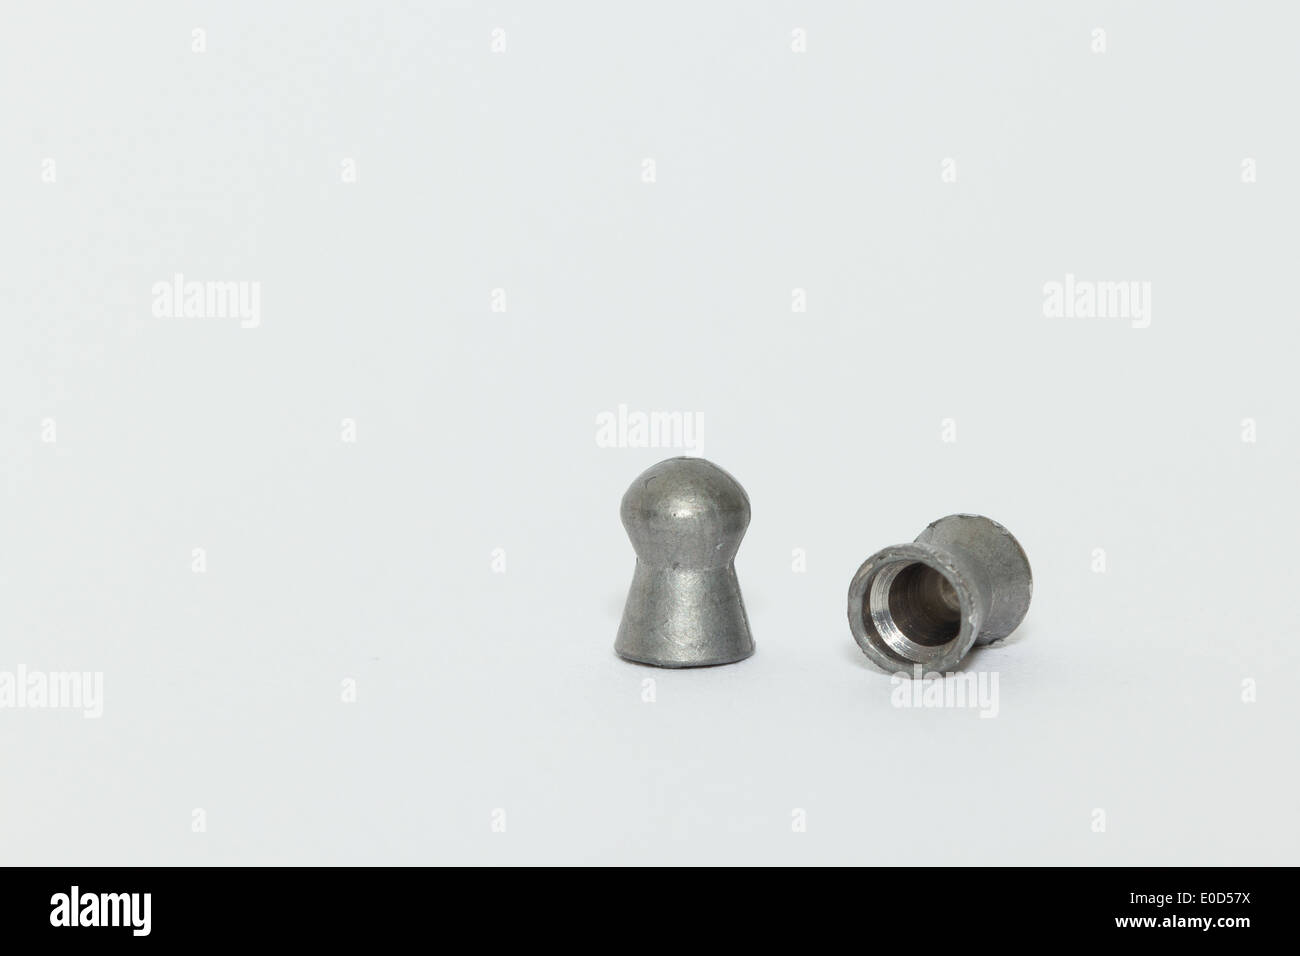 Two airgun bullets Stock Photo